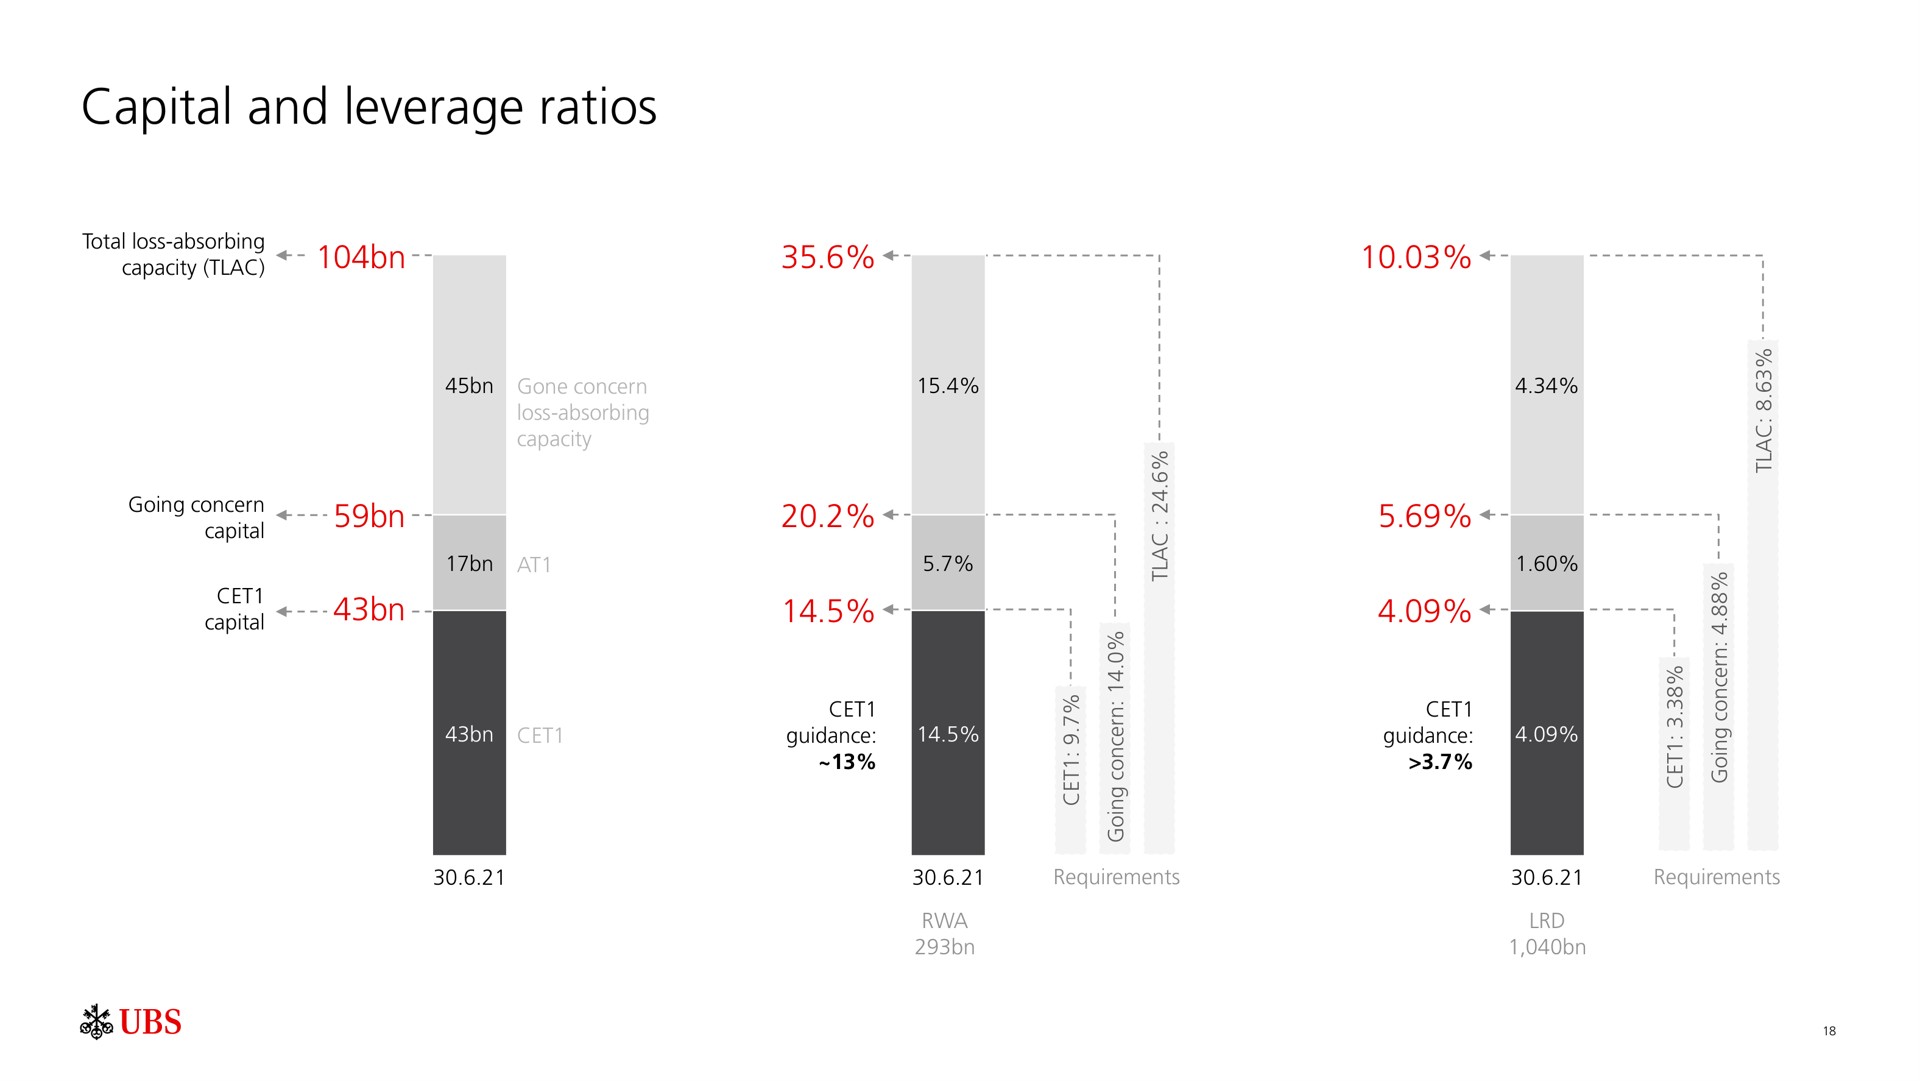 capital and leverage ratios scena pees | UBS